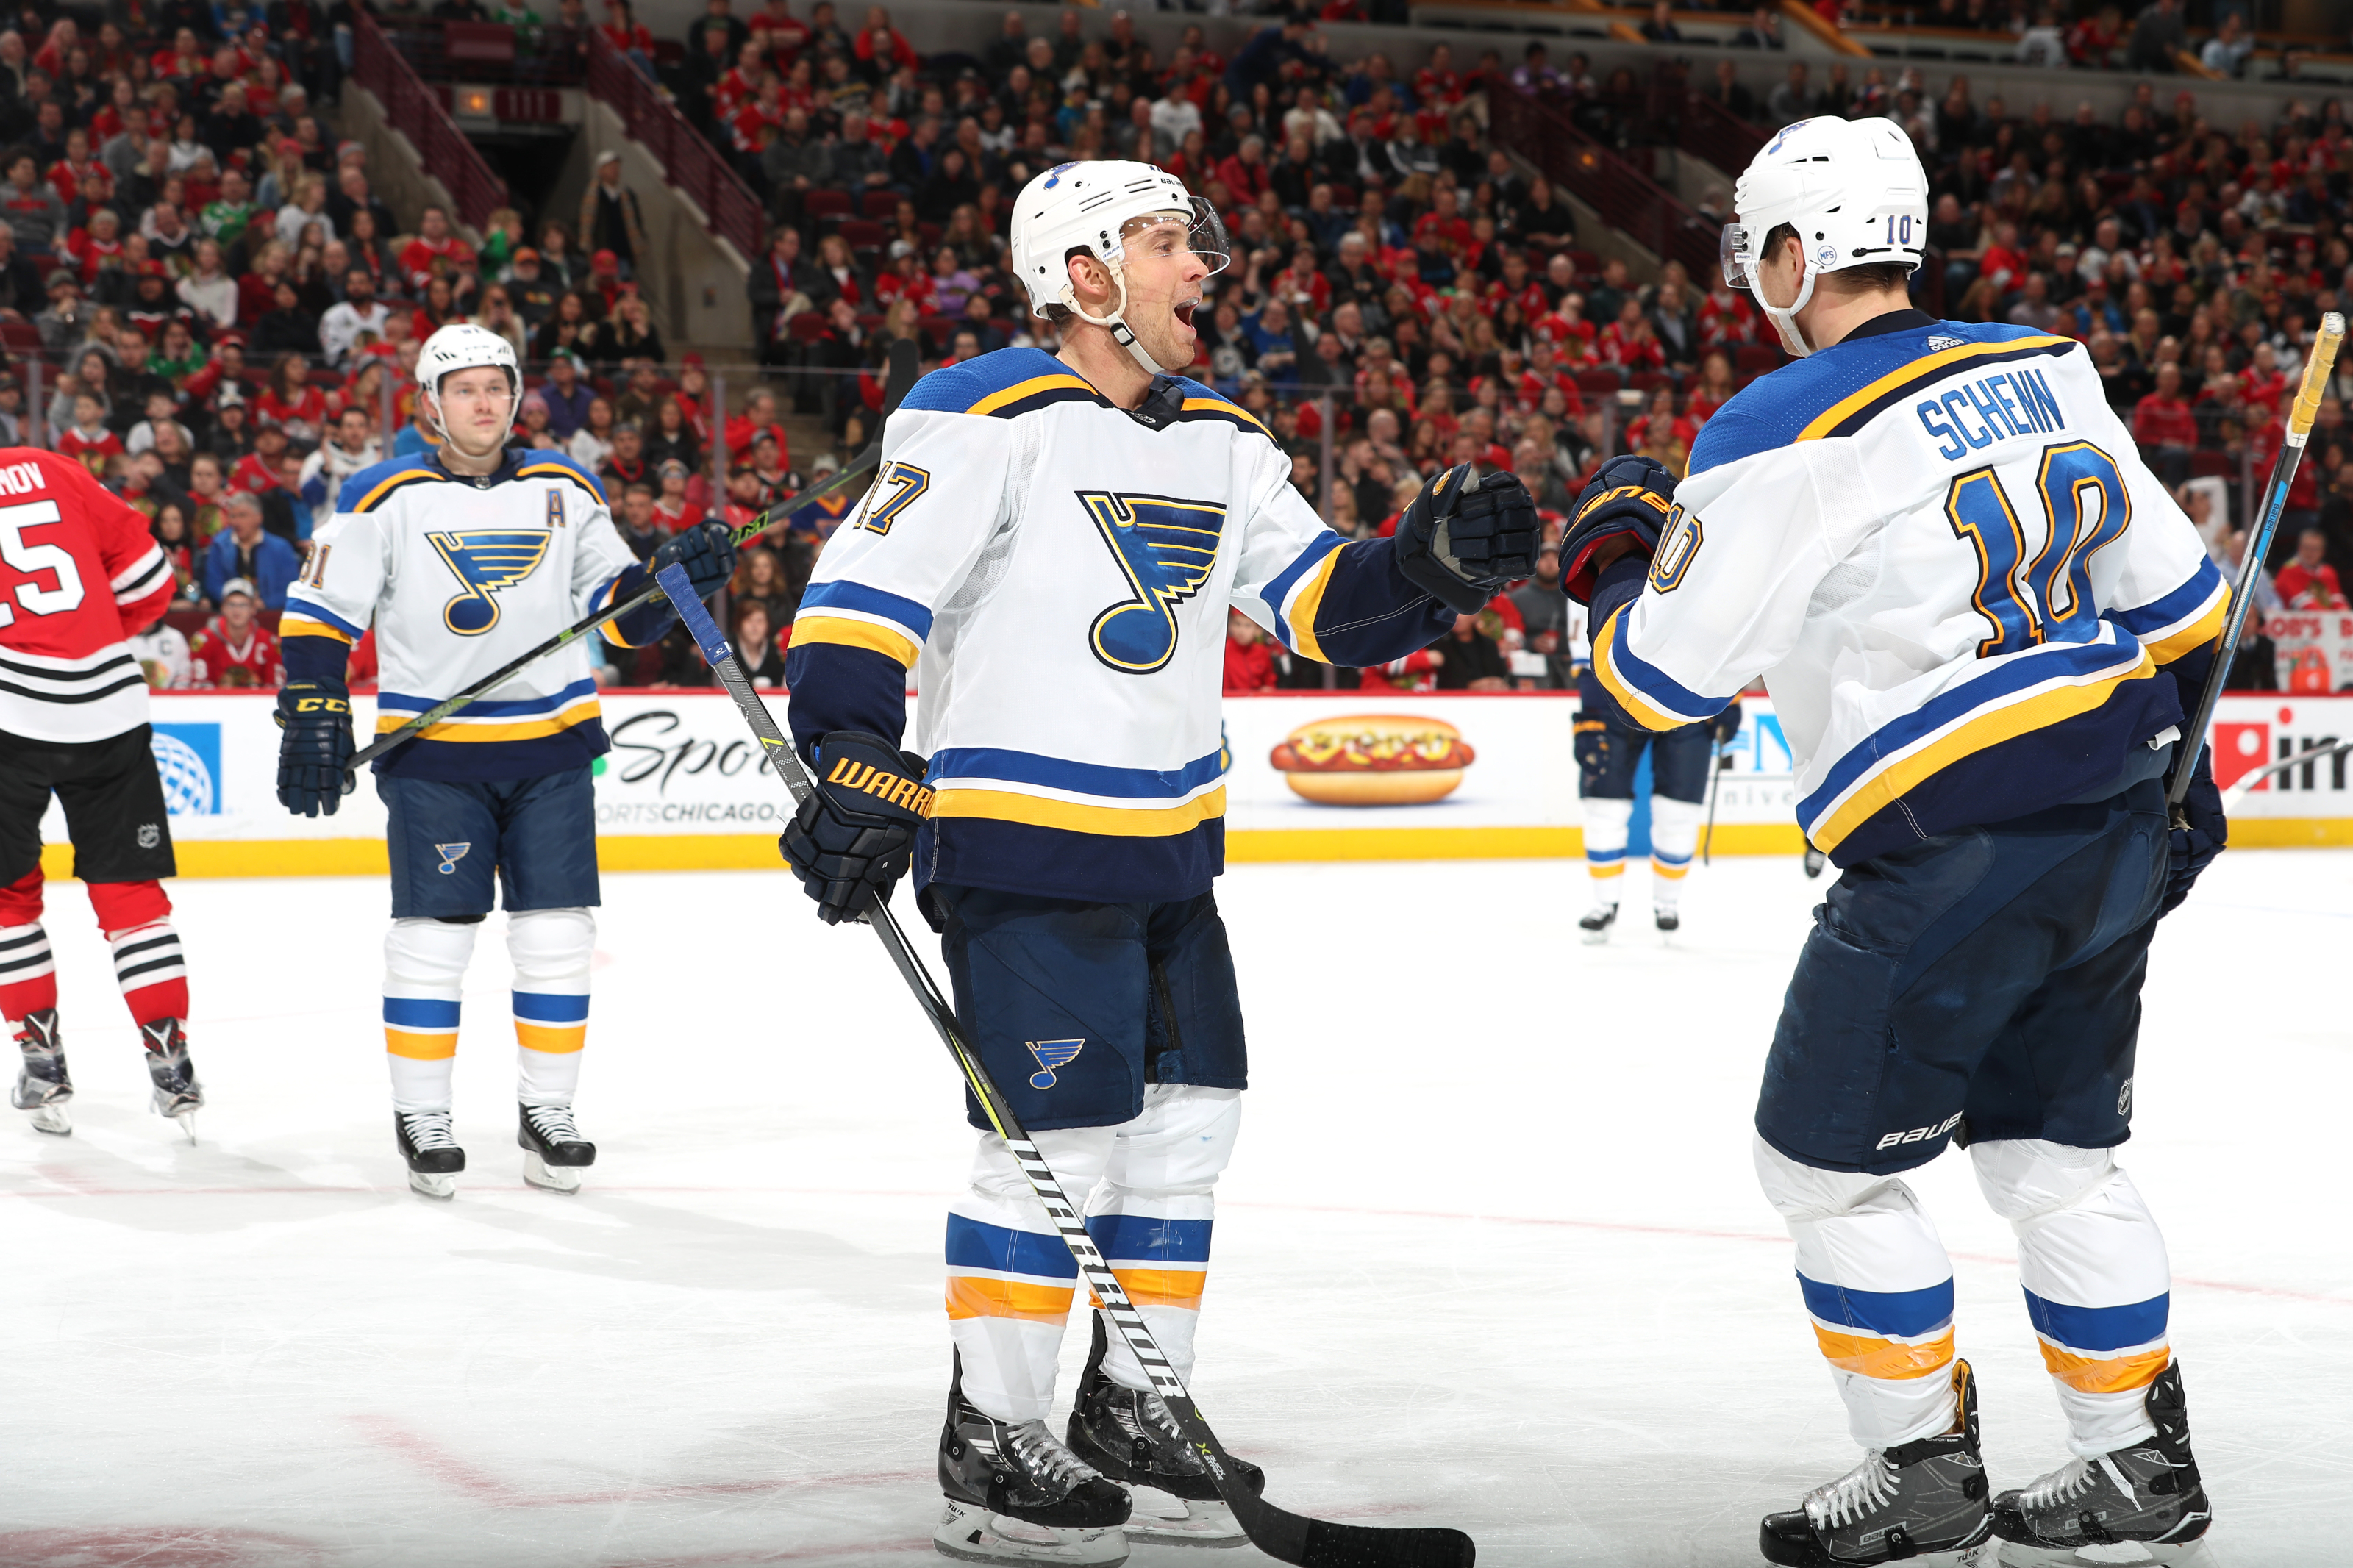 St. Louis Blues Pull No Surprises With 2018-19 Third Jersey